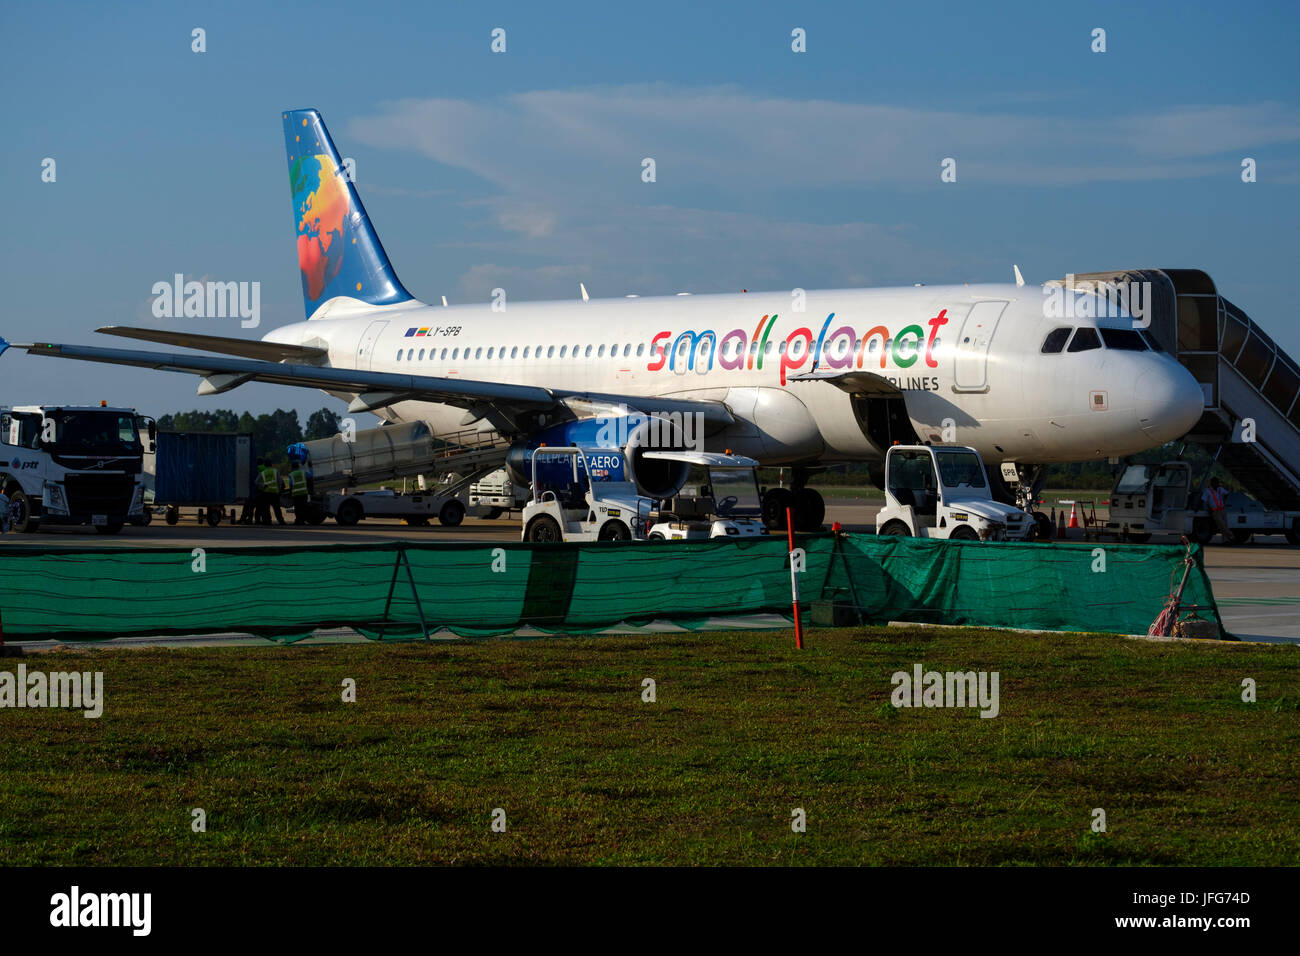 Small Planet Airlines airplane Stock Photo